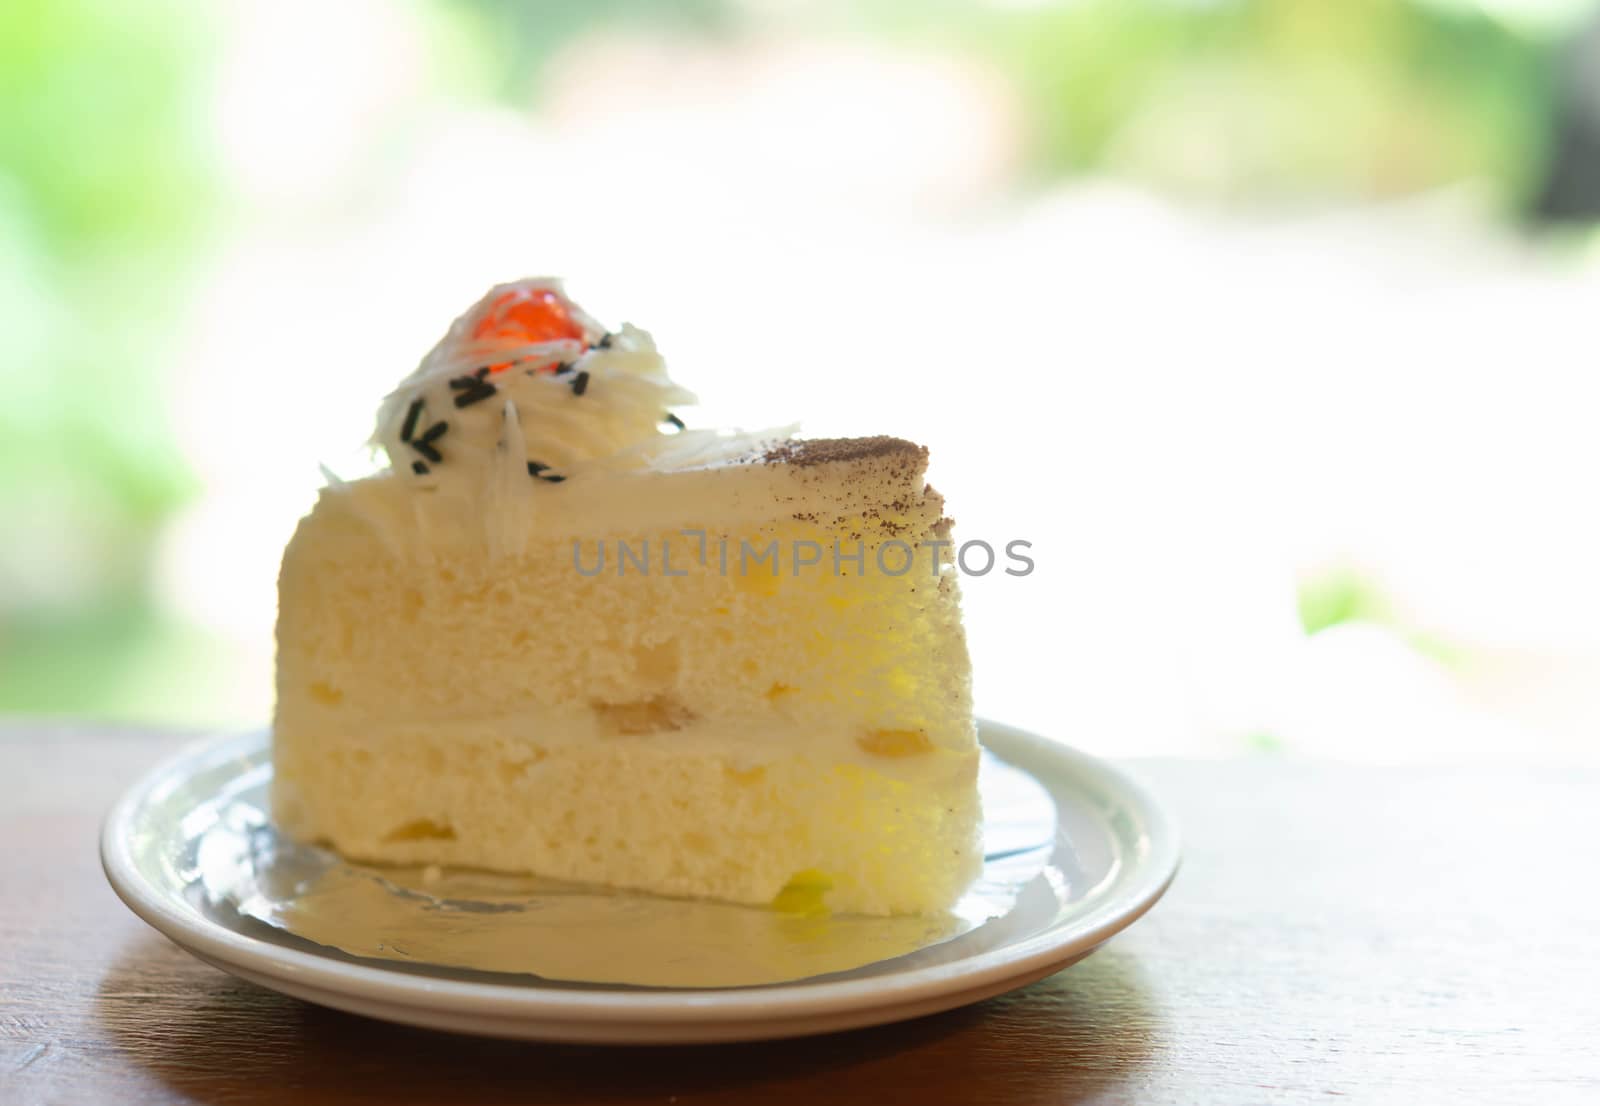 Closeup milk cake on wood table with green nature background, selective focus